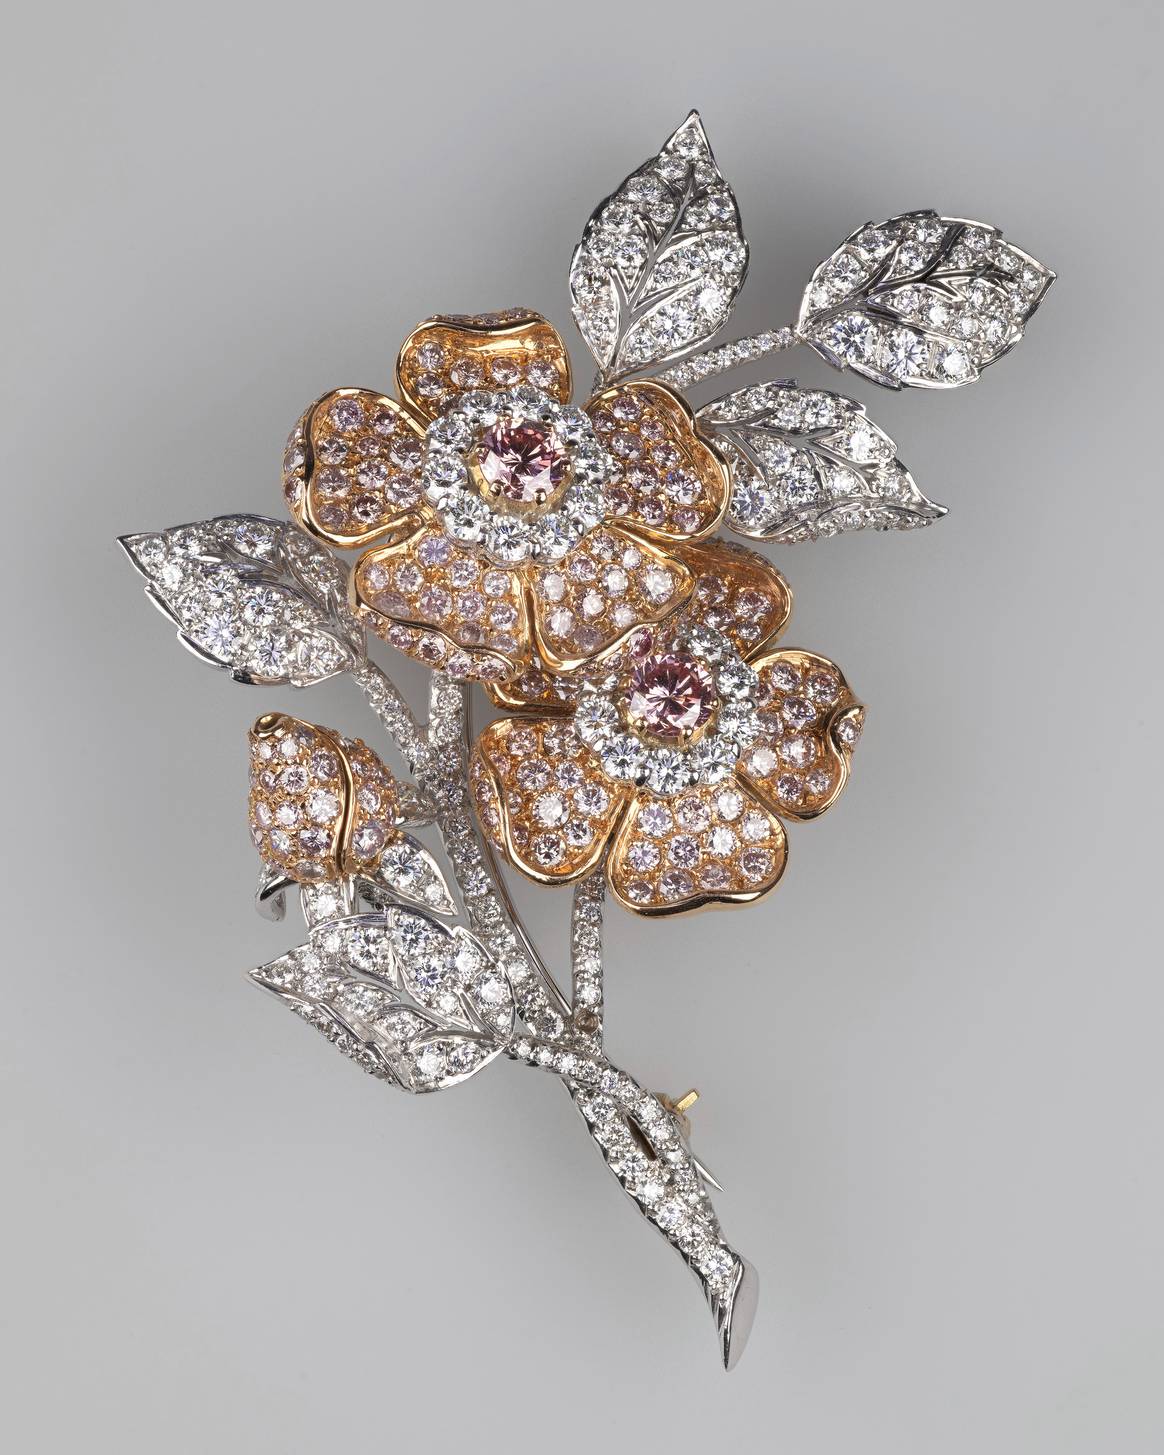 Image: Royal Collection Trust; The Queen’s Rose of England Brooch